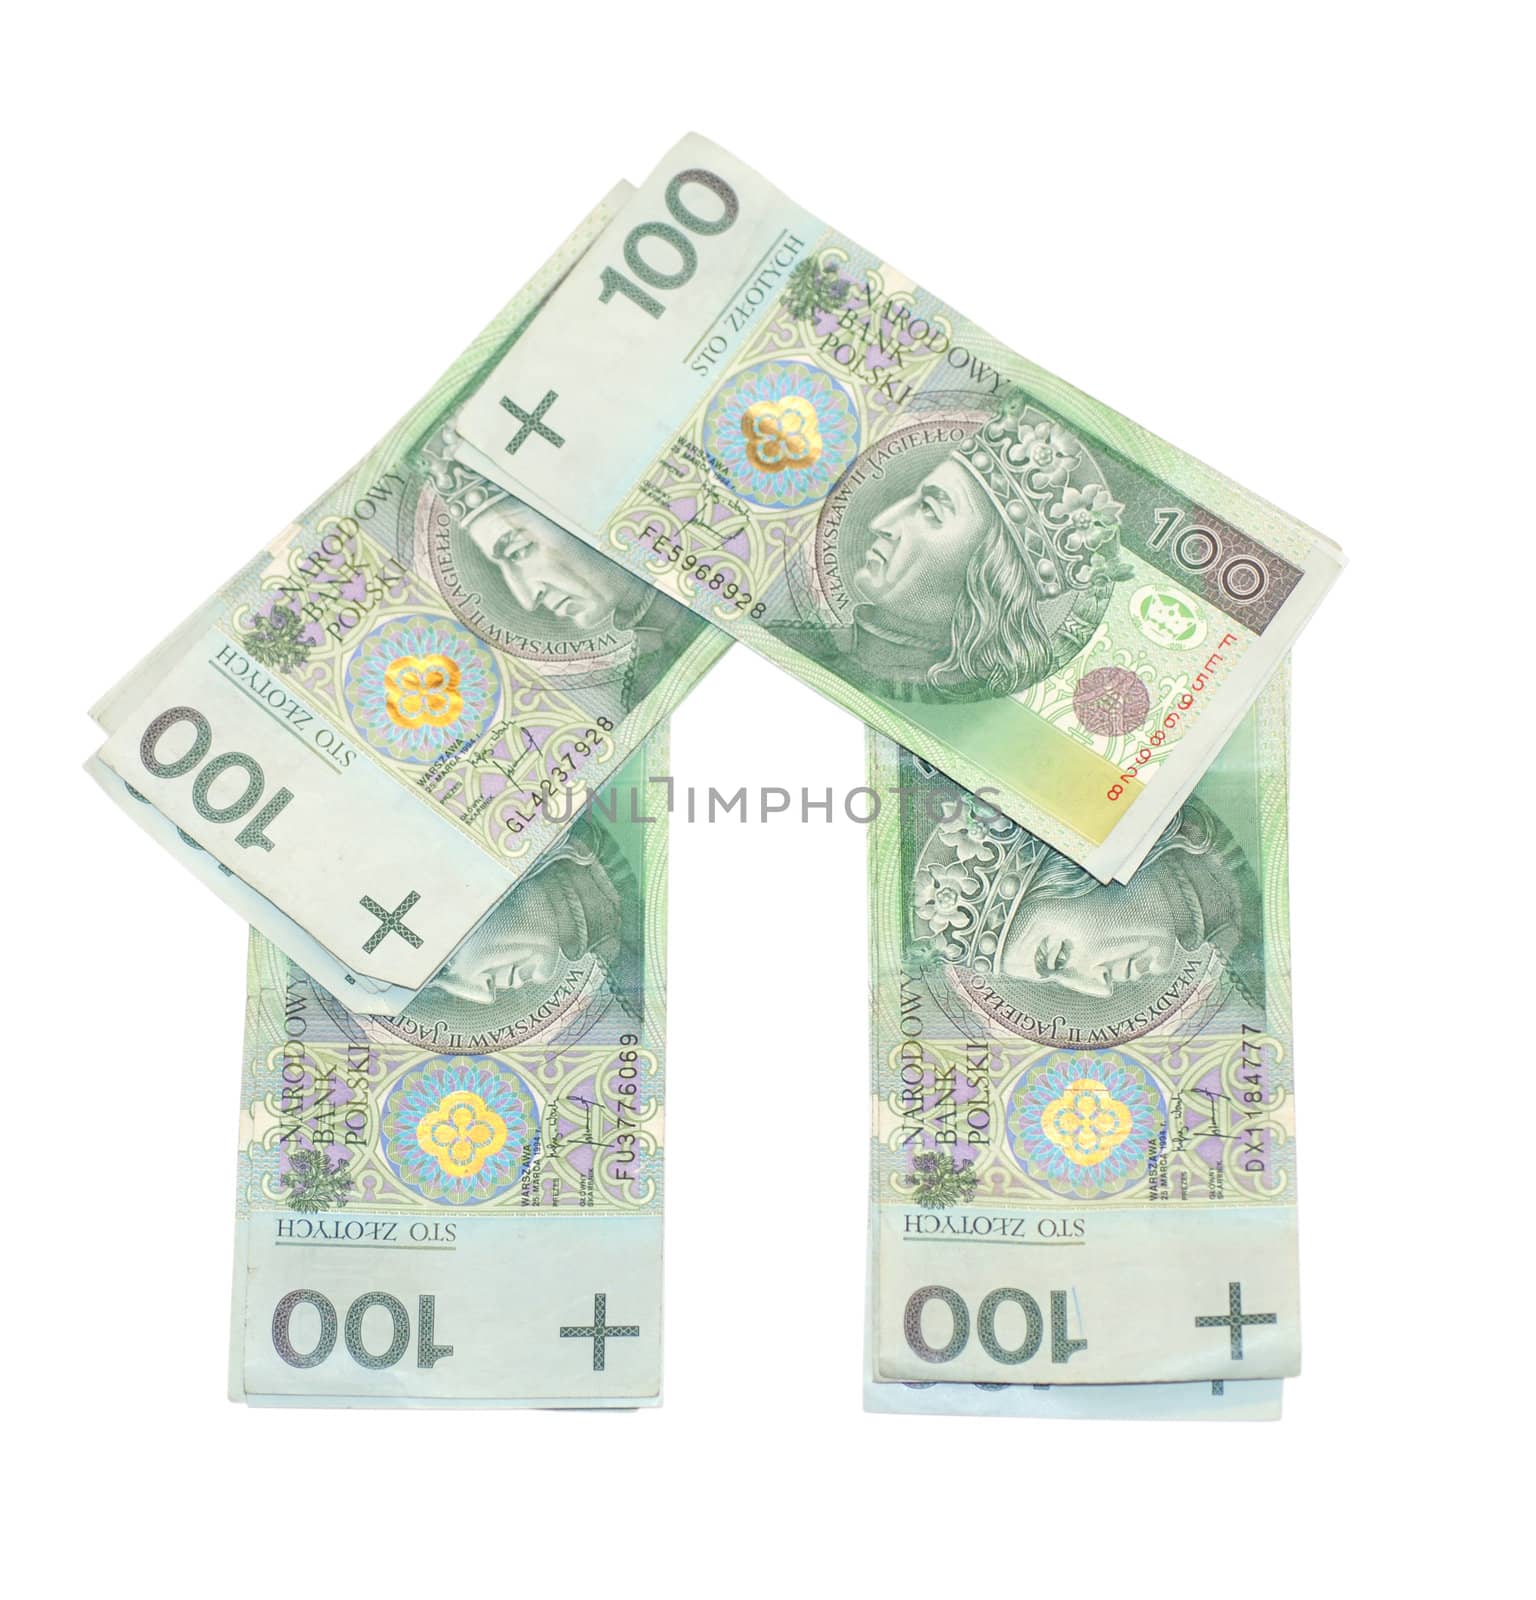 House built with the money. Banknotes PLN 100. Expensive housing